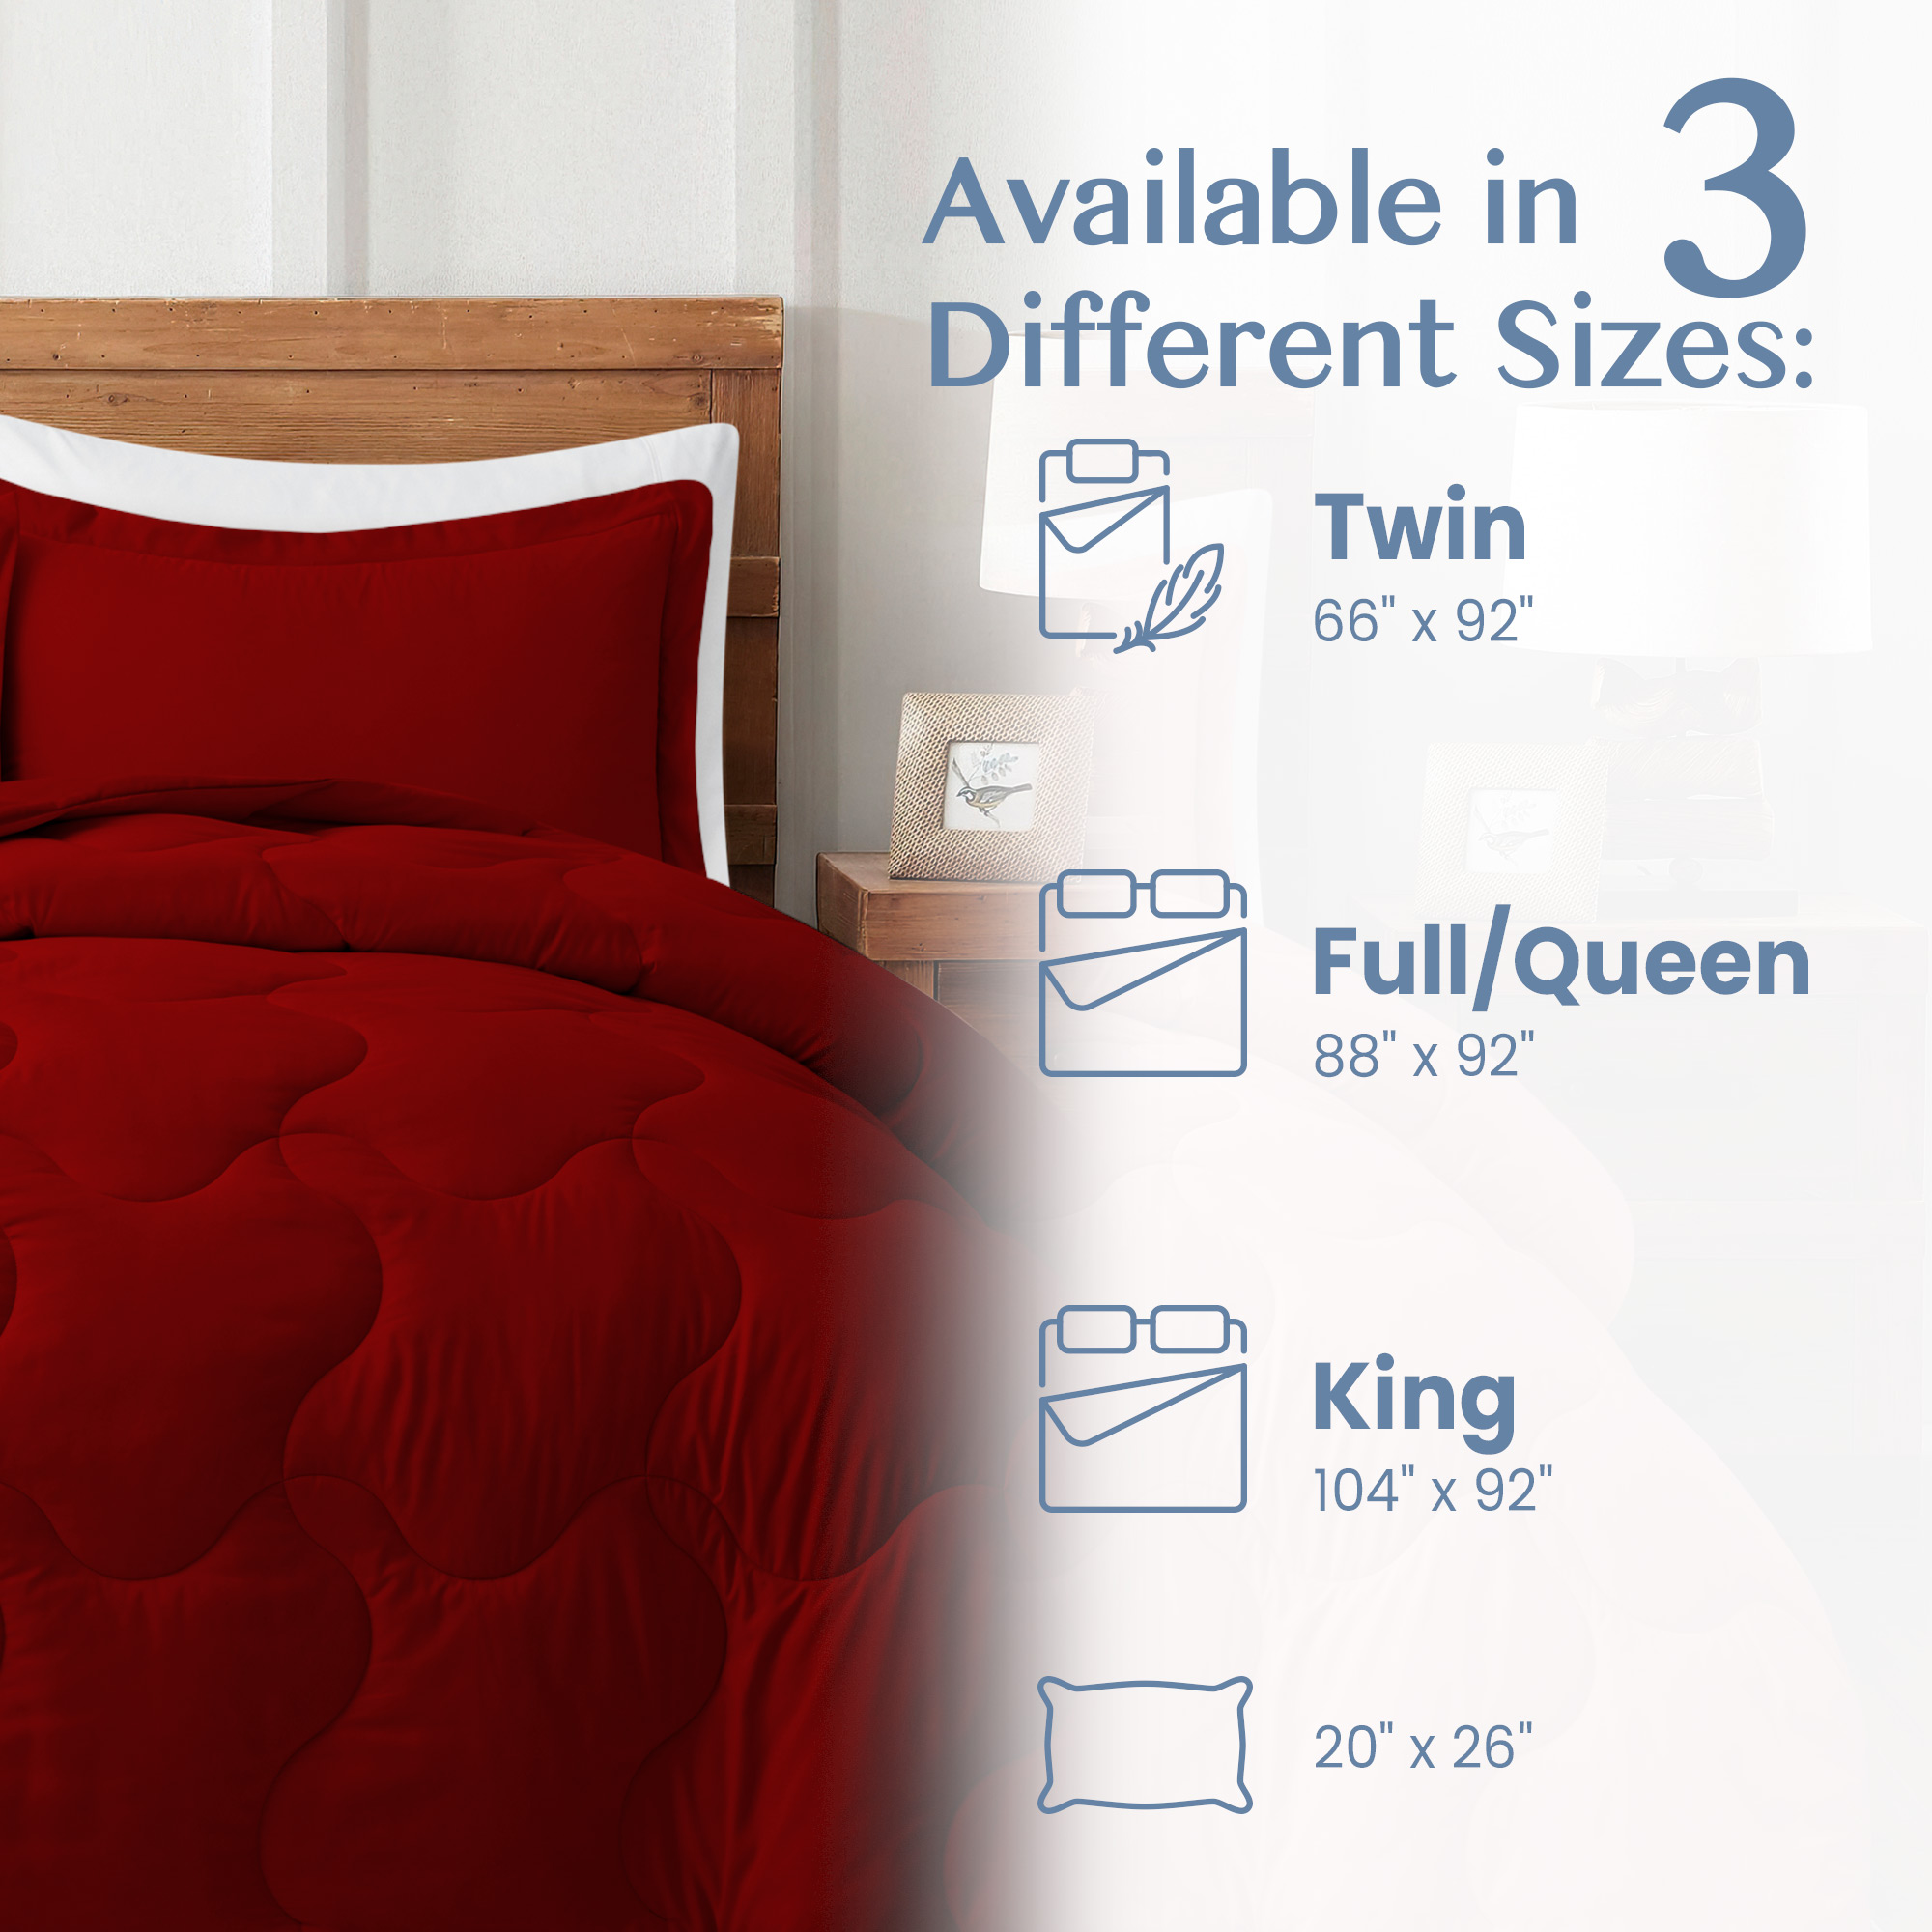 Peace Nest 3-Piece Lightweight Solid Reversible Quilted Down Alternative Comforter and Shams Bedding Set, Queen - image 2 of 6